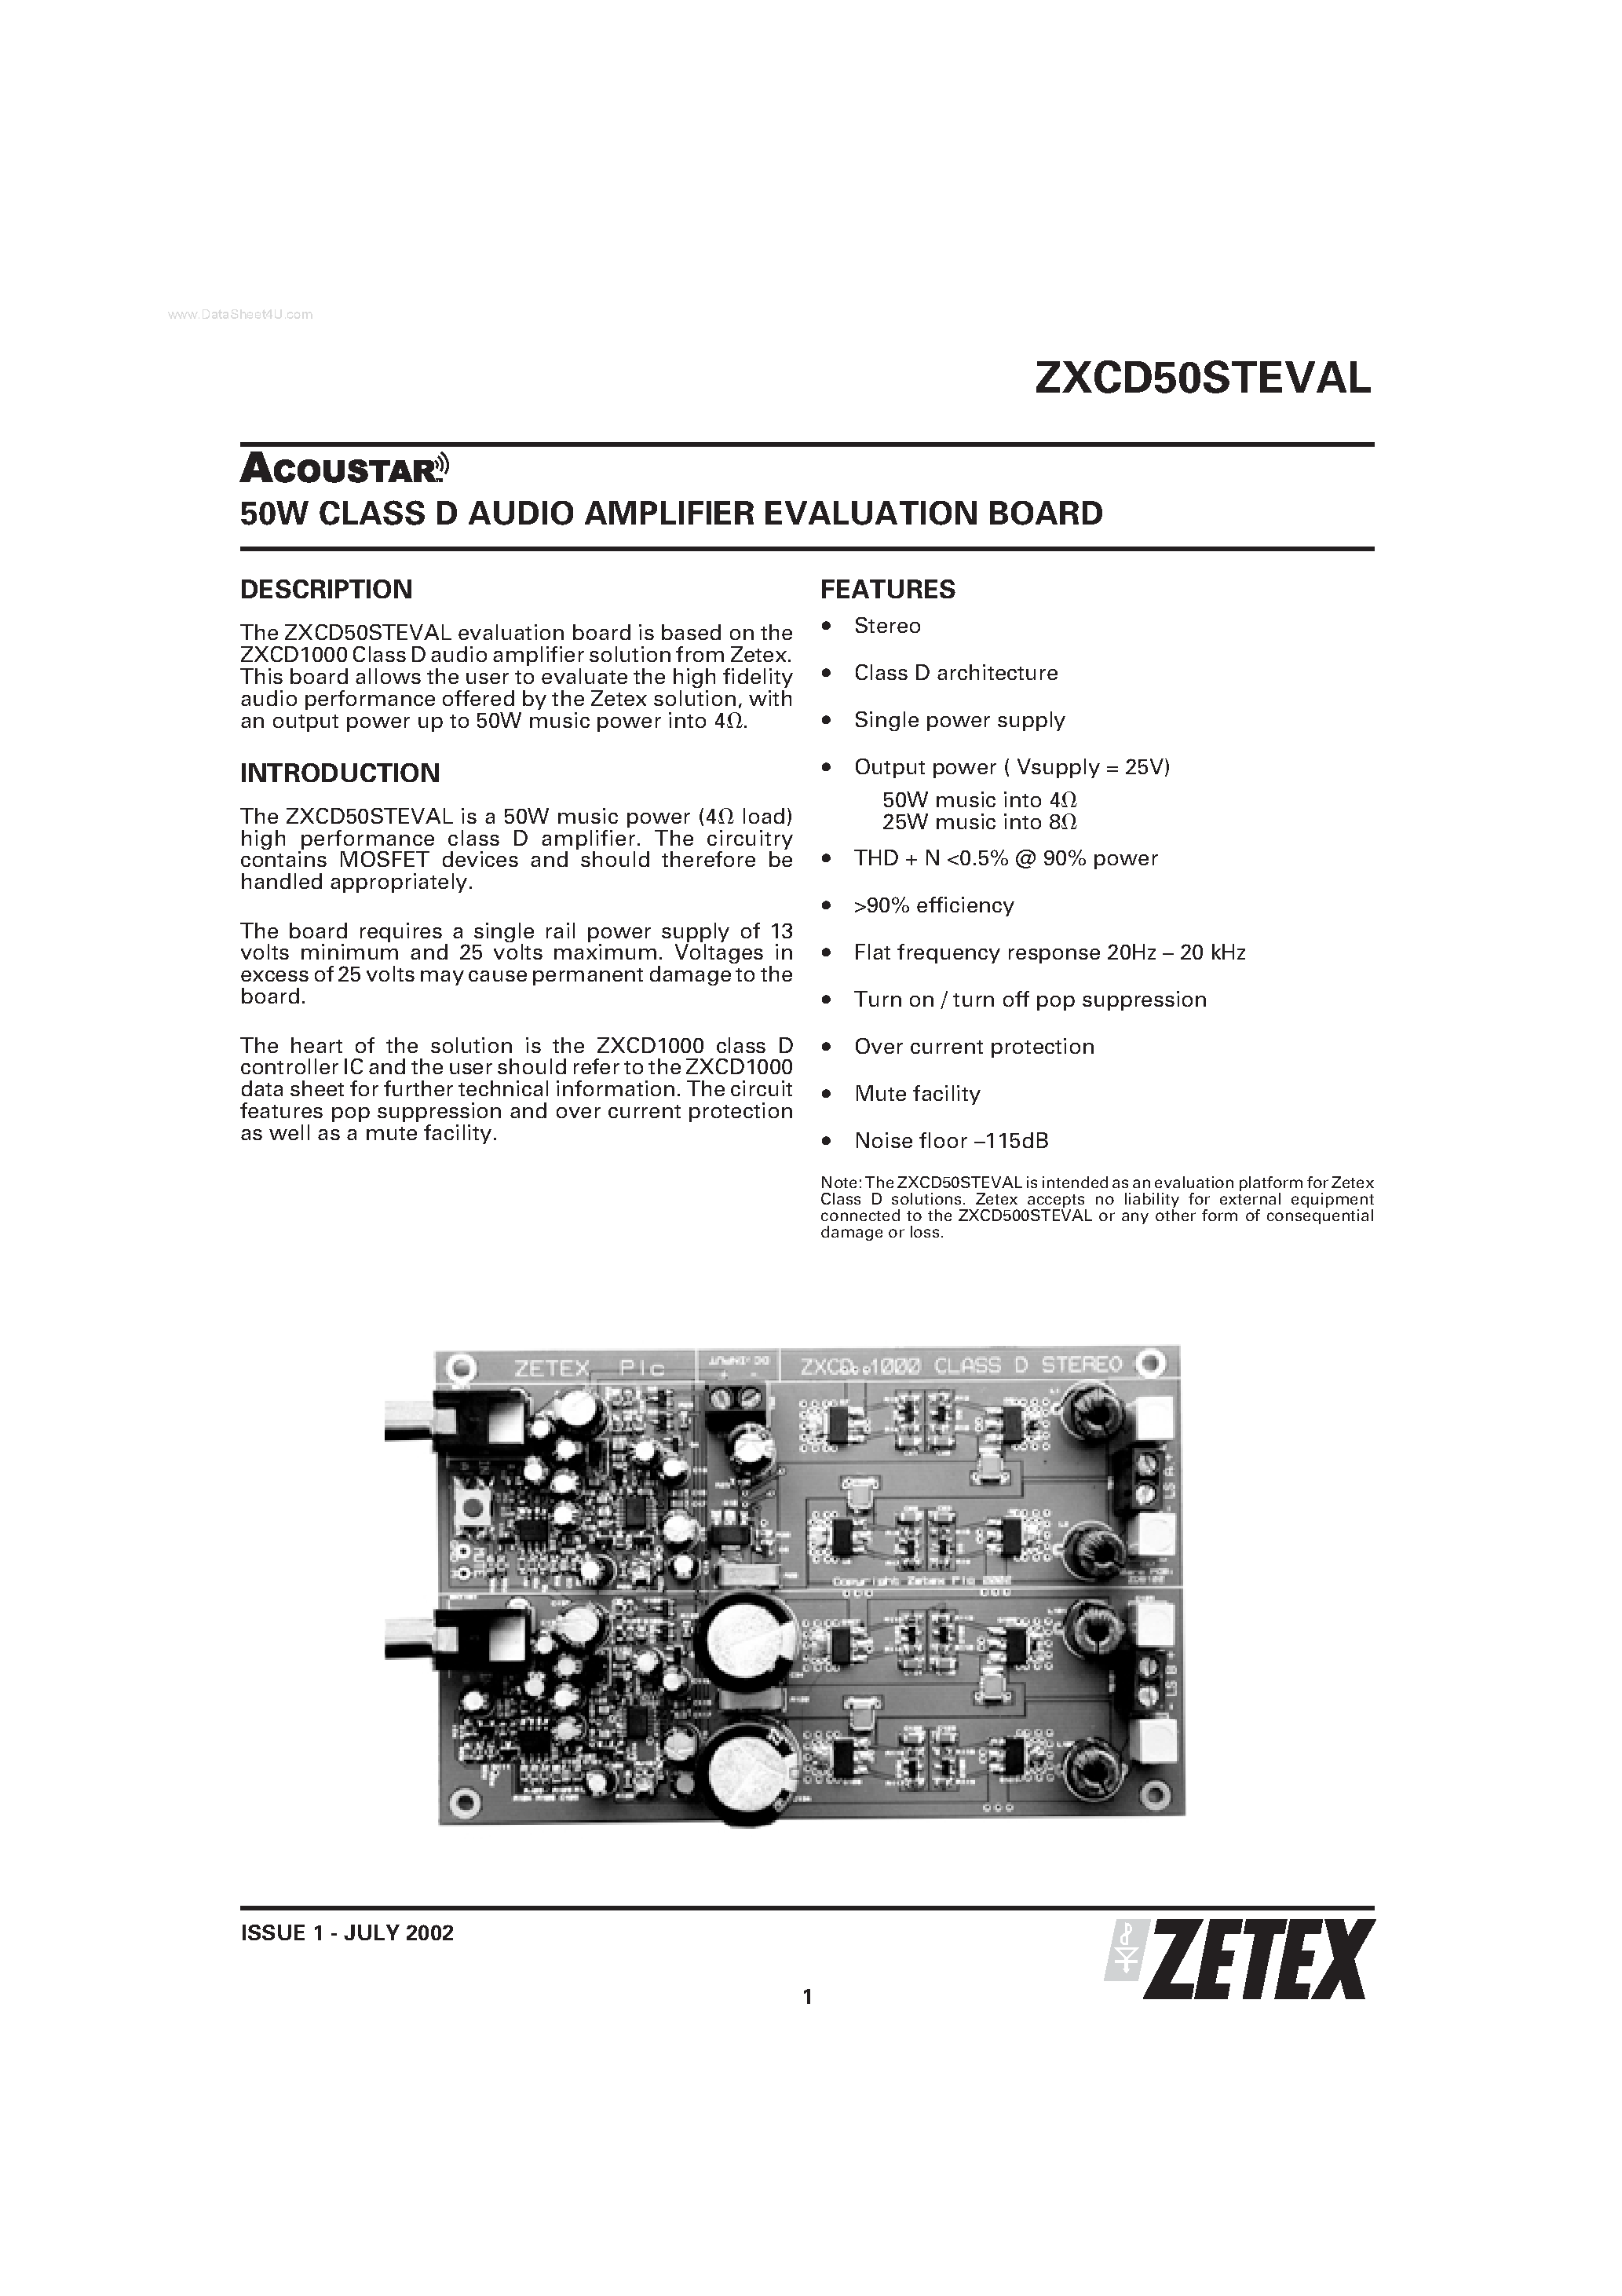 Даташит ZXCD50STEVAL - 50W CLASS D AUDIO AMPLIFIER EVALUATION BOARD страница 1